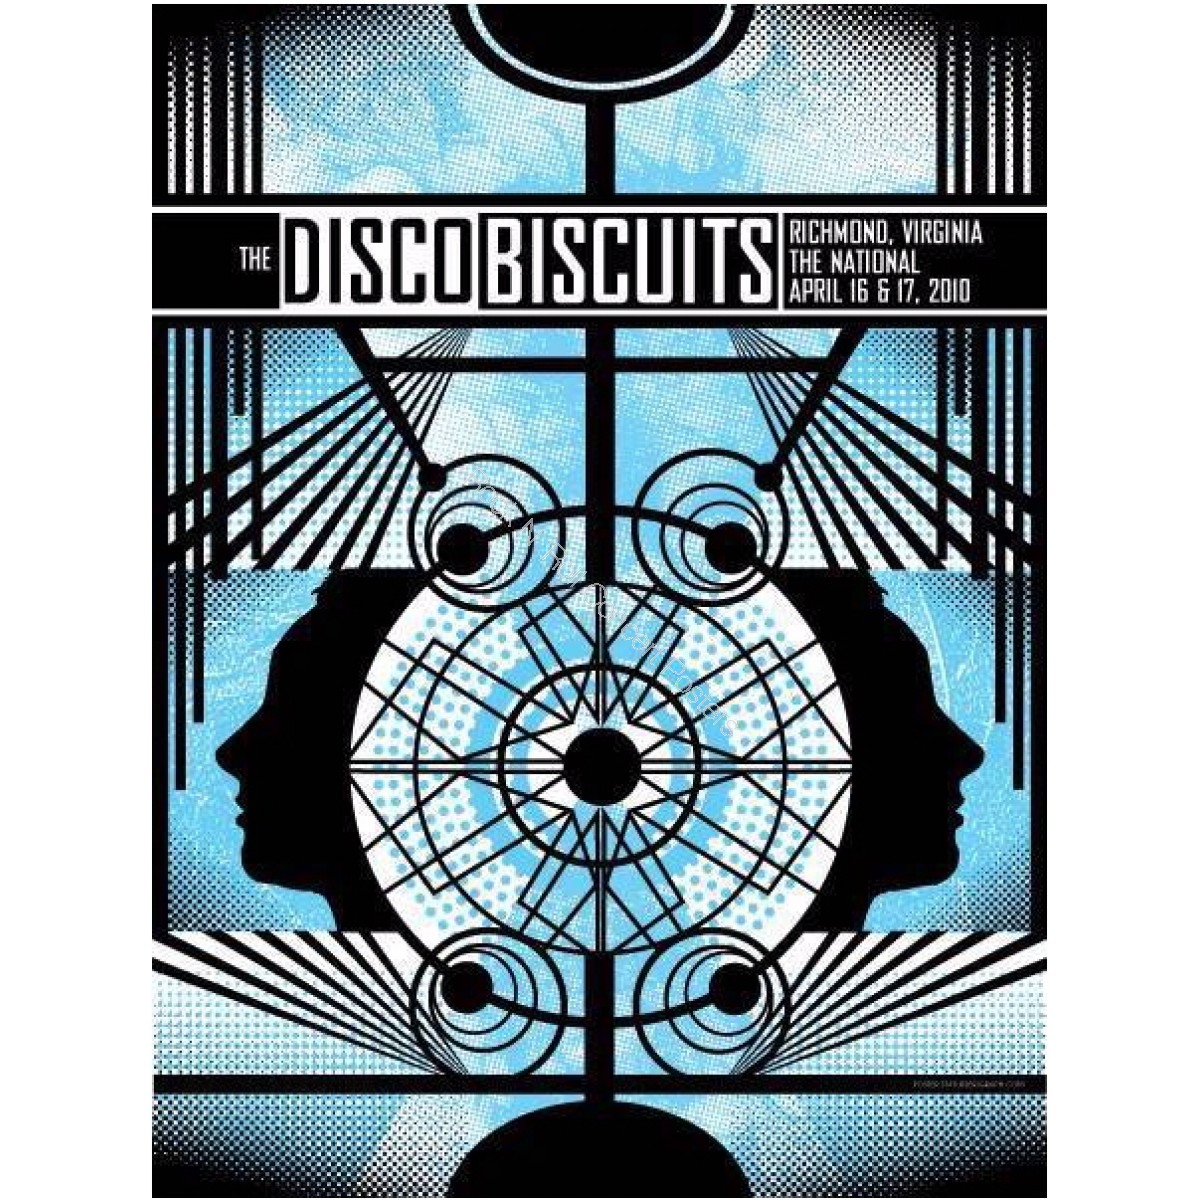 Disco Biscuits @ The National Richmond VA. April 16th& 17th 2010 Official Poster By Status Serigraph